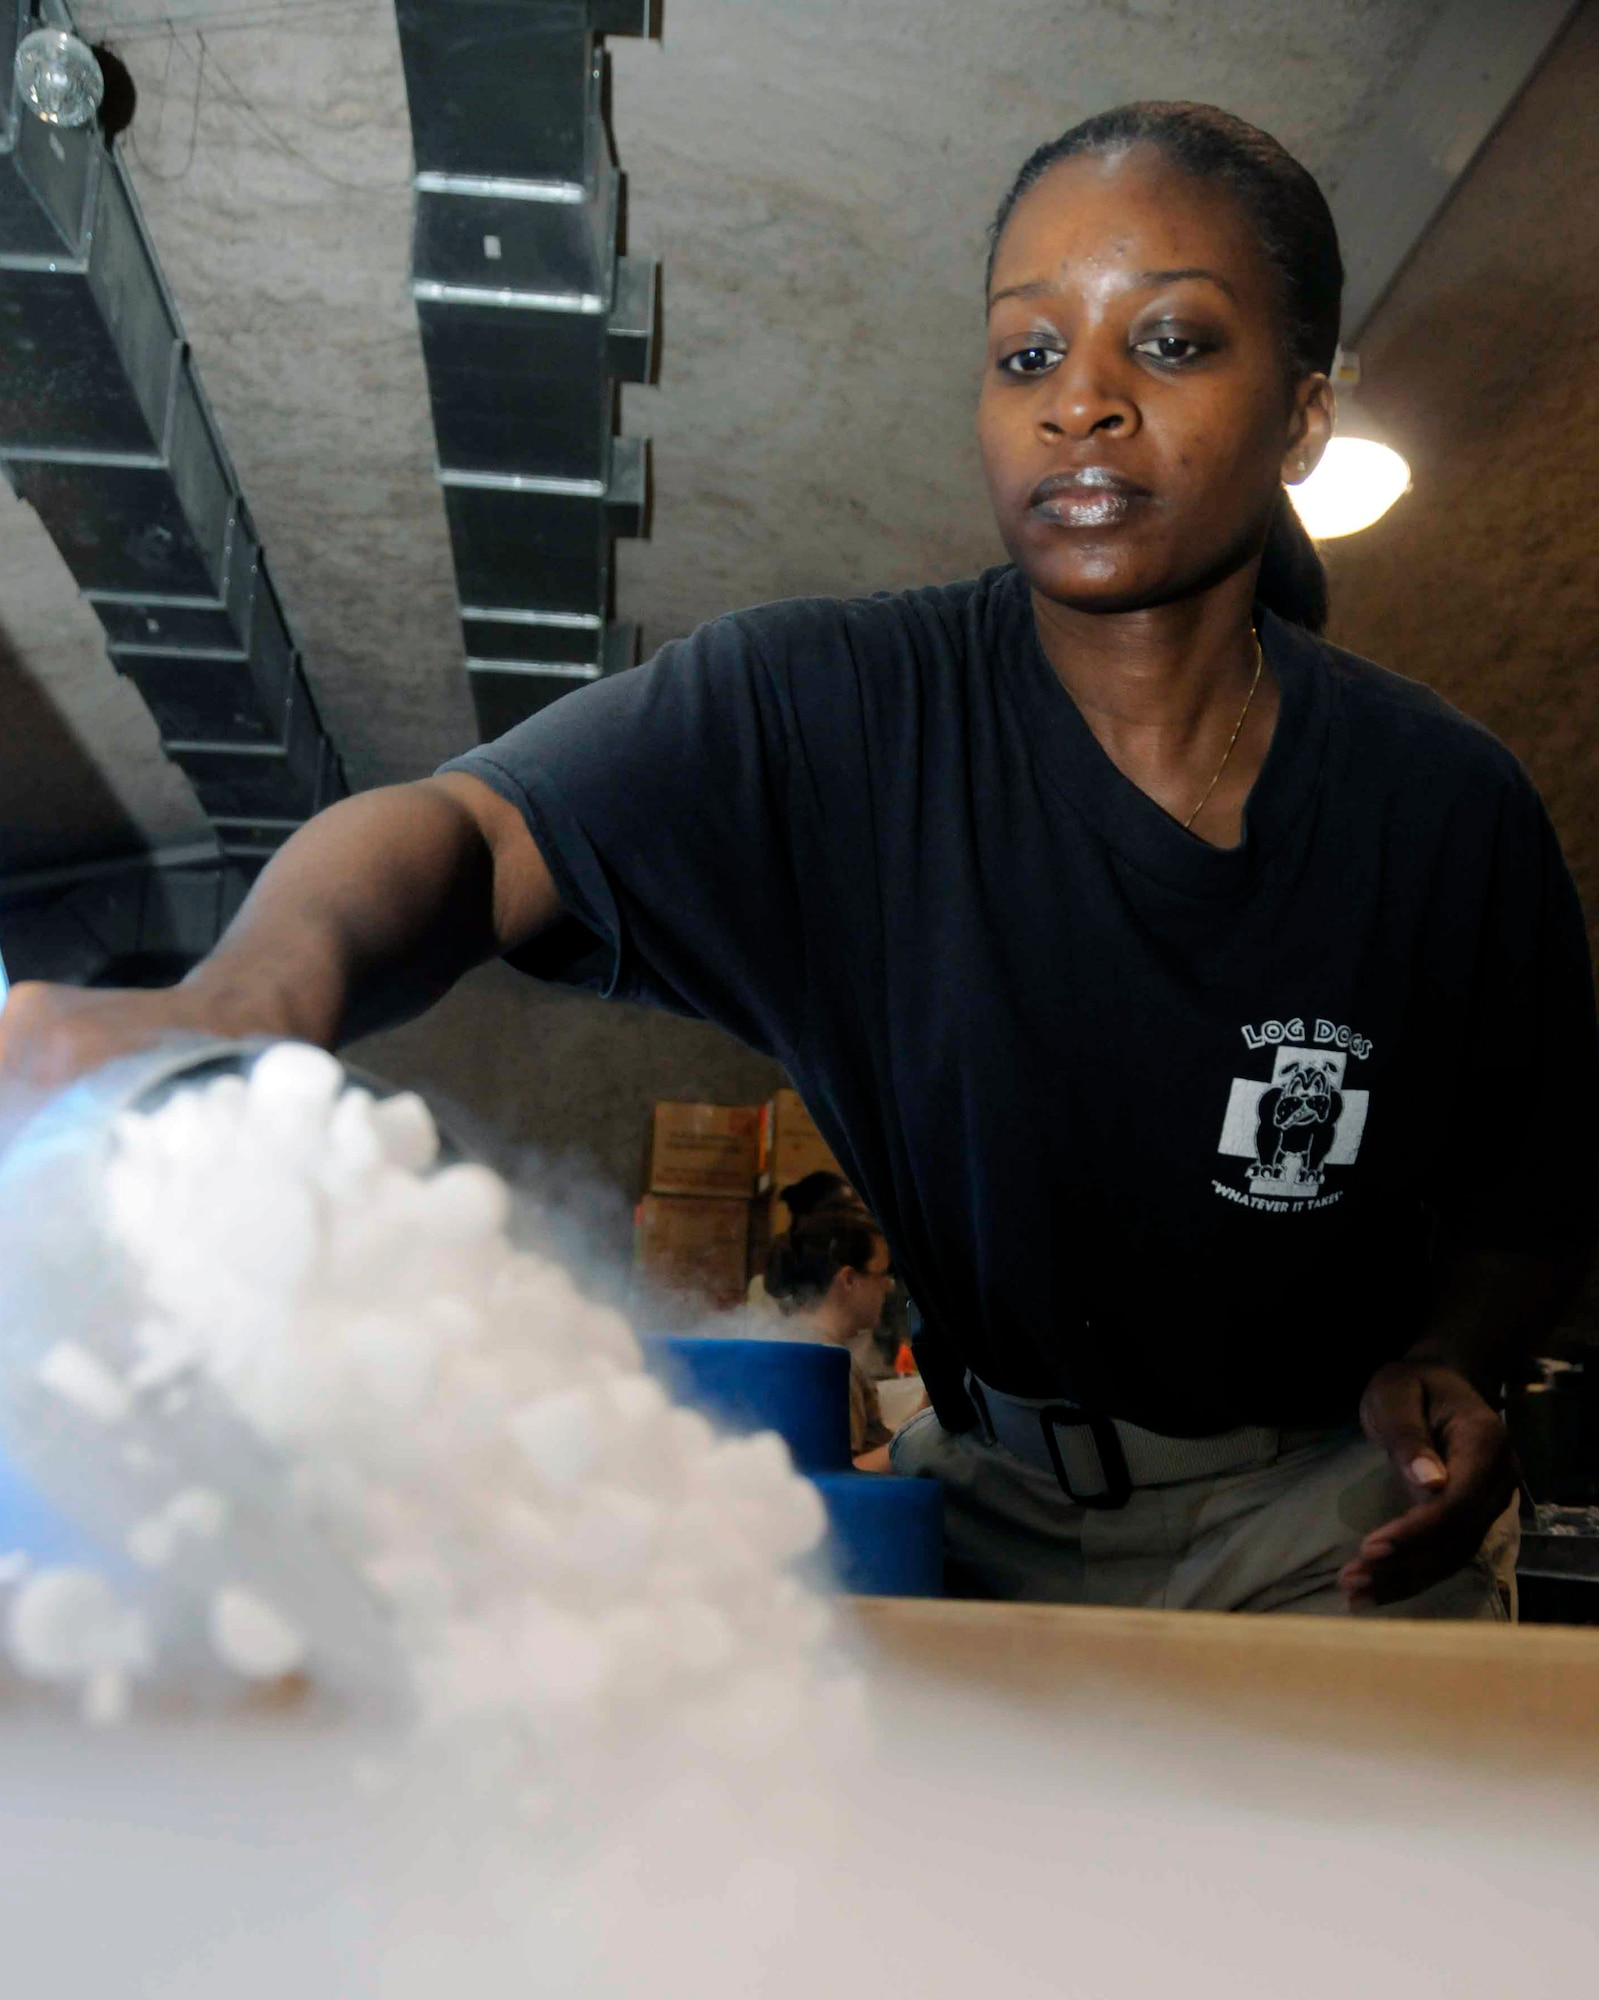 Tech. Sgt. Paula Todd scoops dry ice into a box used for shipping blood May 6 at the Blood Transshipment Center in Southwest Asia. Sergeant Todd is the NCO in charge of the BTC and is responsible for inventory and shipment of blood products throughout the Persian Gulf region. (U.S. Air Force photo) 